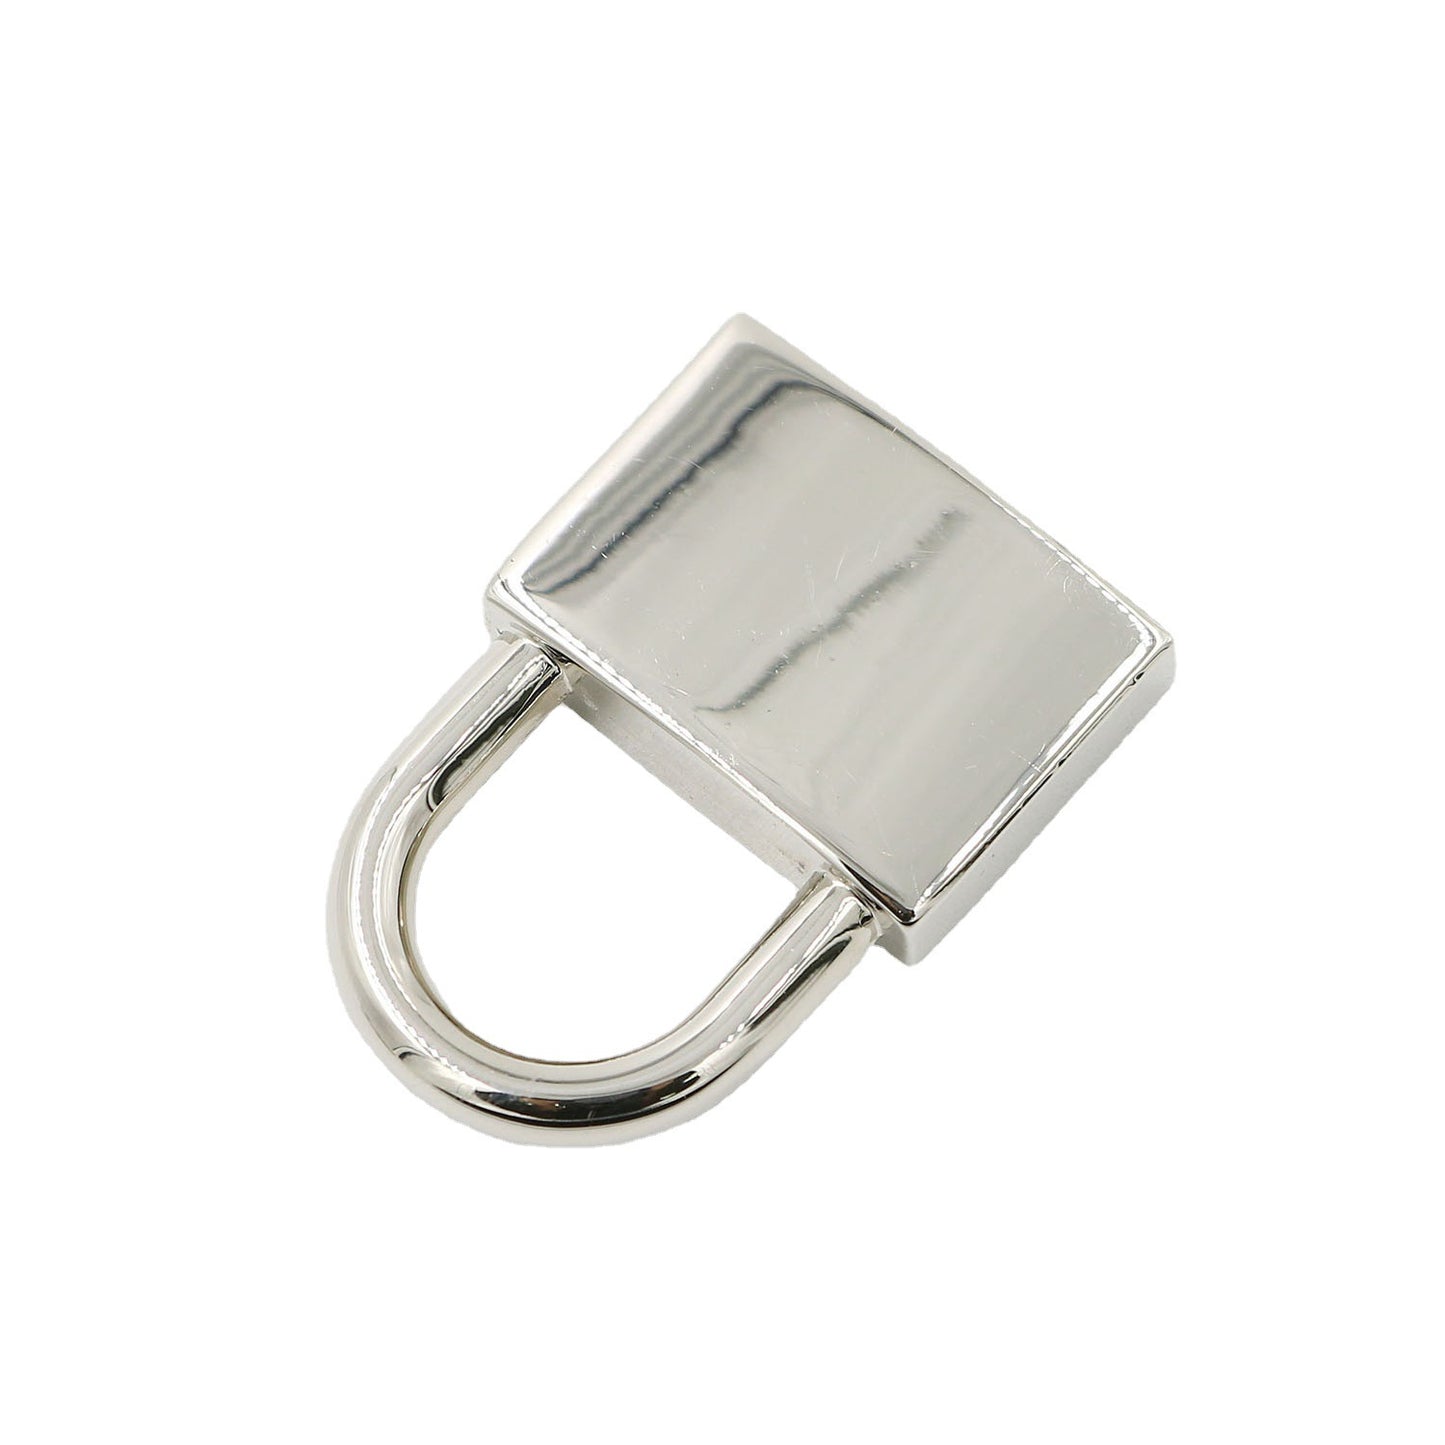 High Quality Bag Accessories Metal Lock for Handbags Luggage Box without Key-28